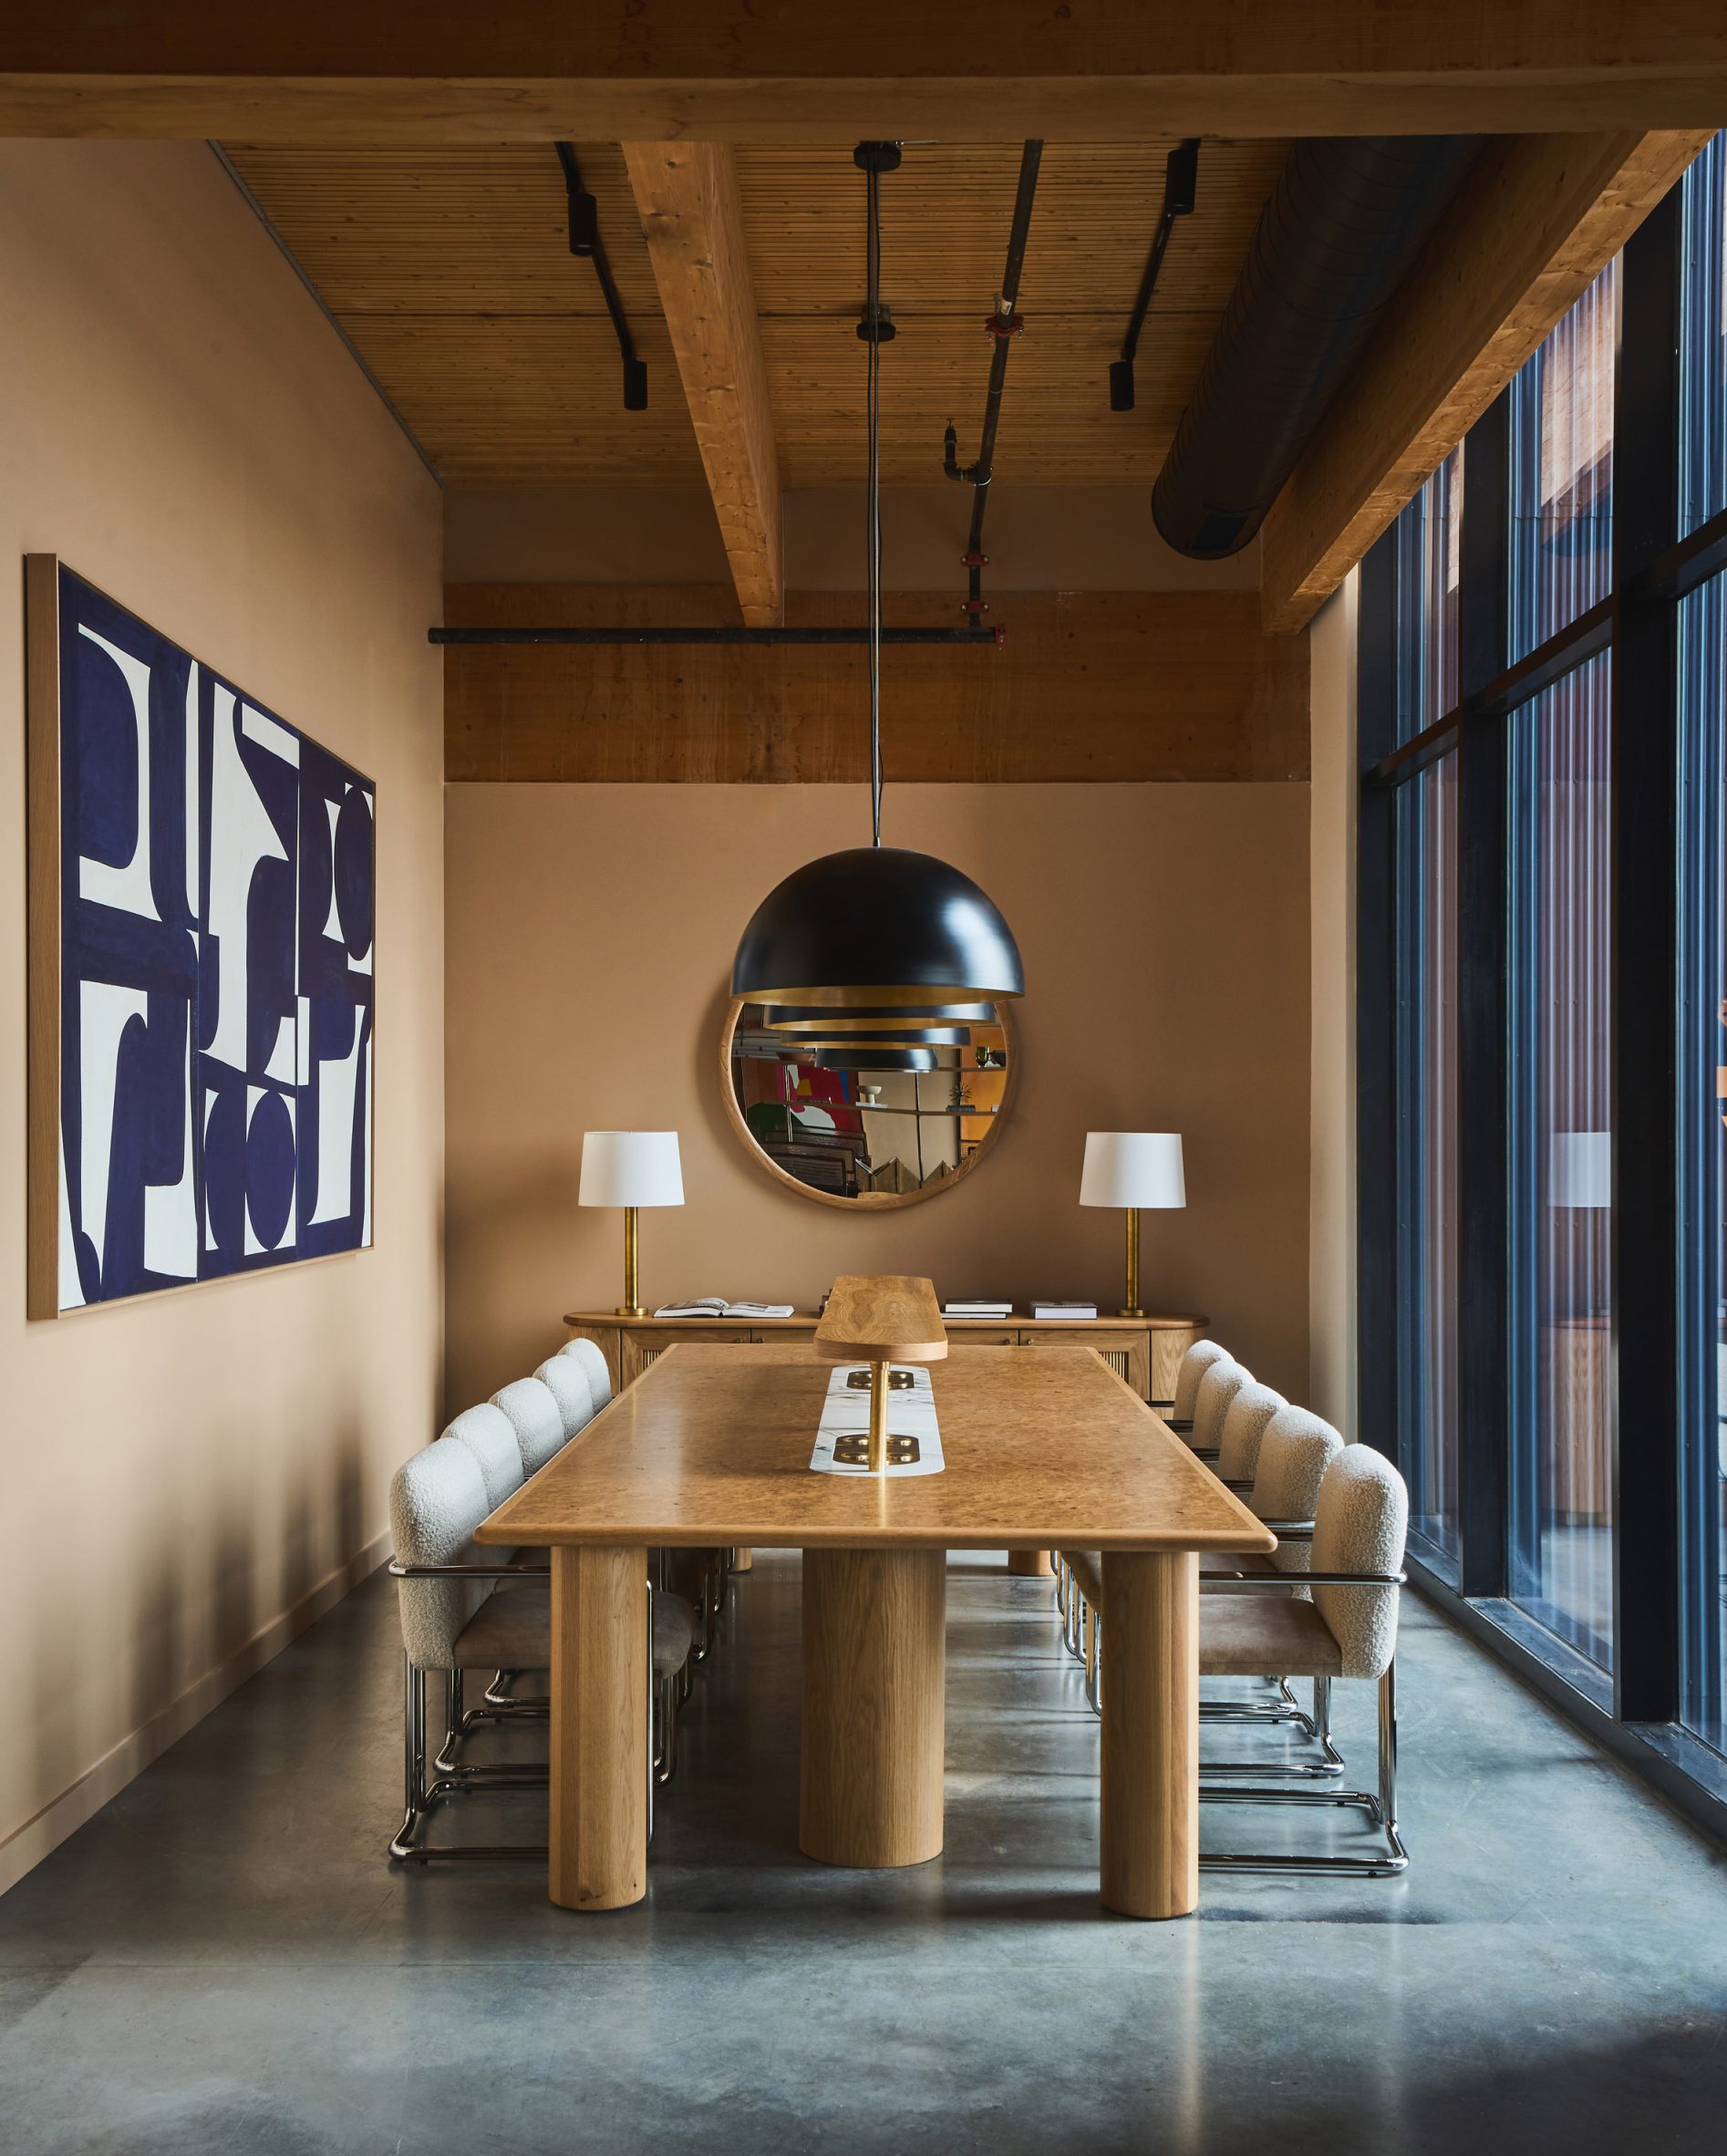 Meeting room with tan walls, large wooden table and tubular metal chairs